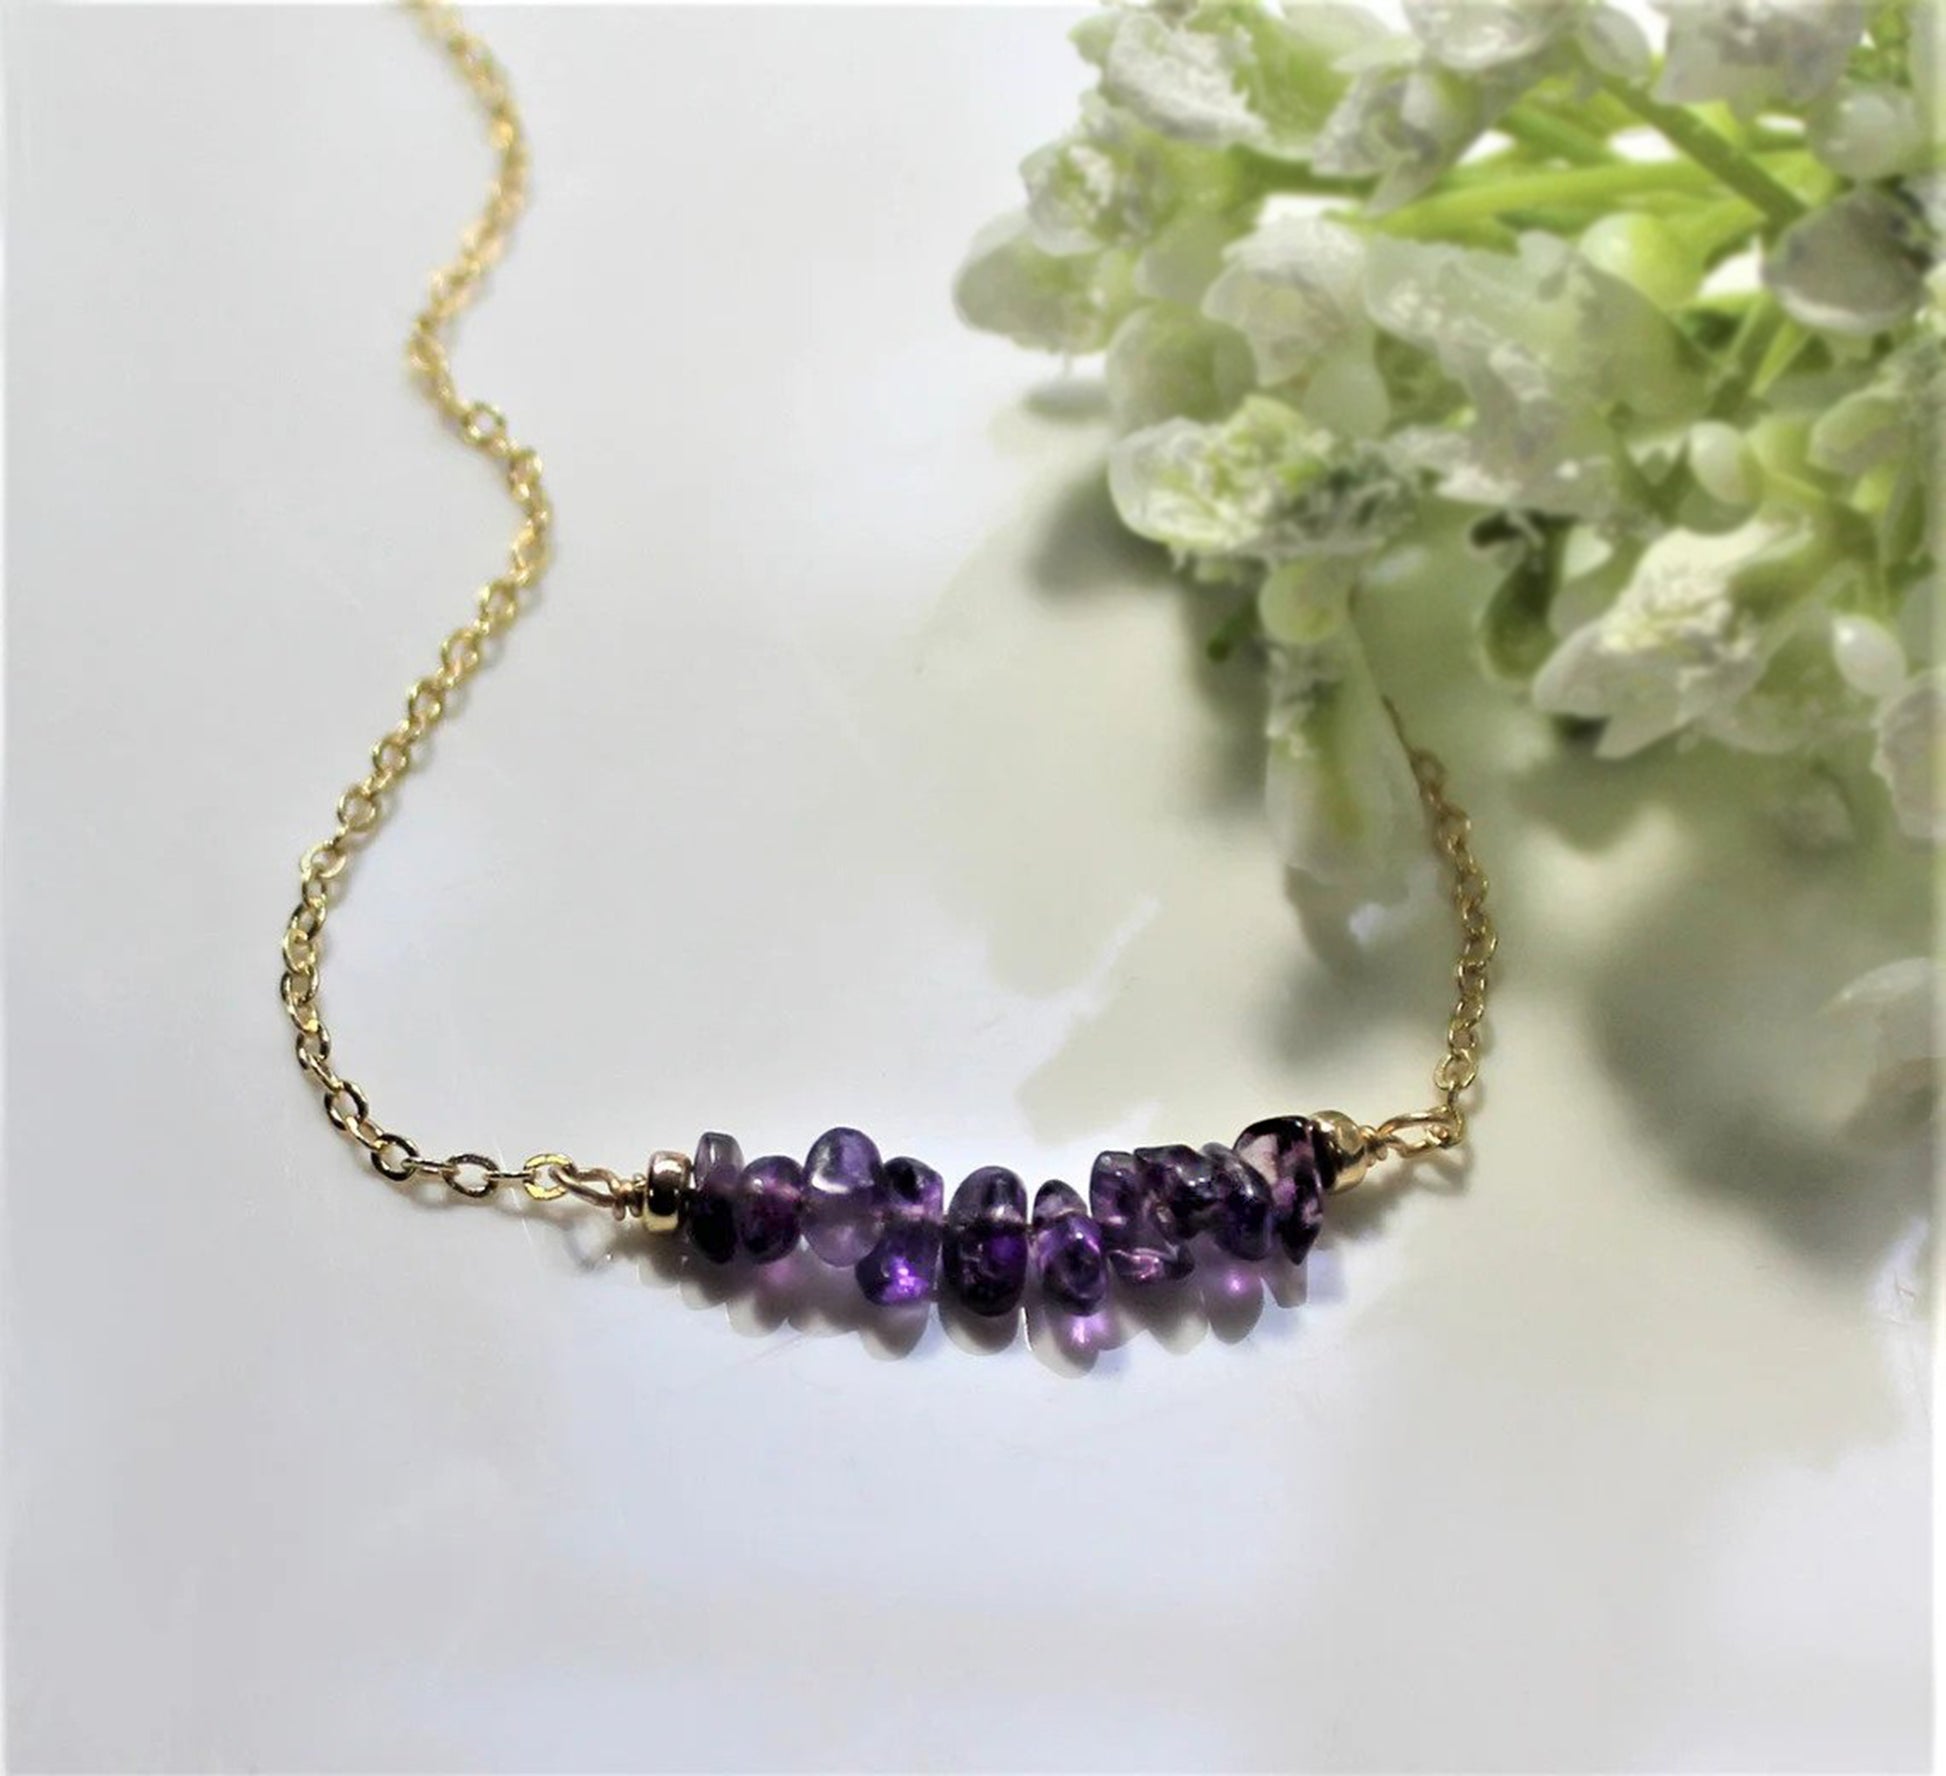 Natural amethyst gemstone chips beaded onto jewelers wire creates a handmade birthstone bar necklace complete with gold filled chain laying on a plain white display surface and decorative white and green flowers in the background.